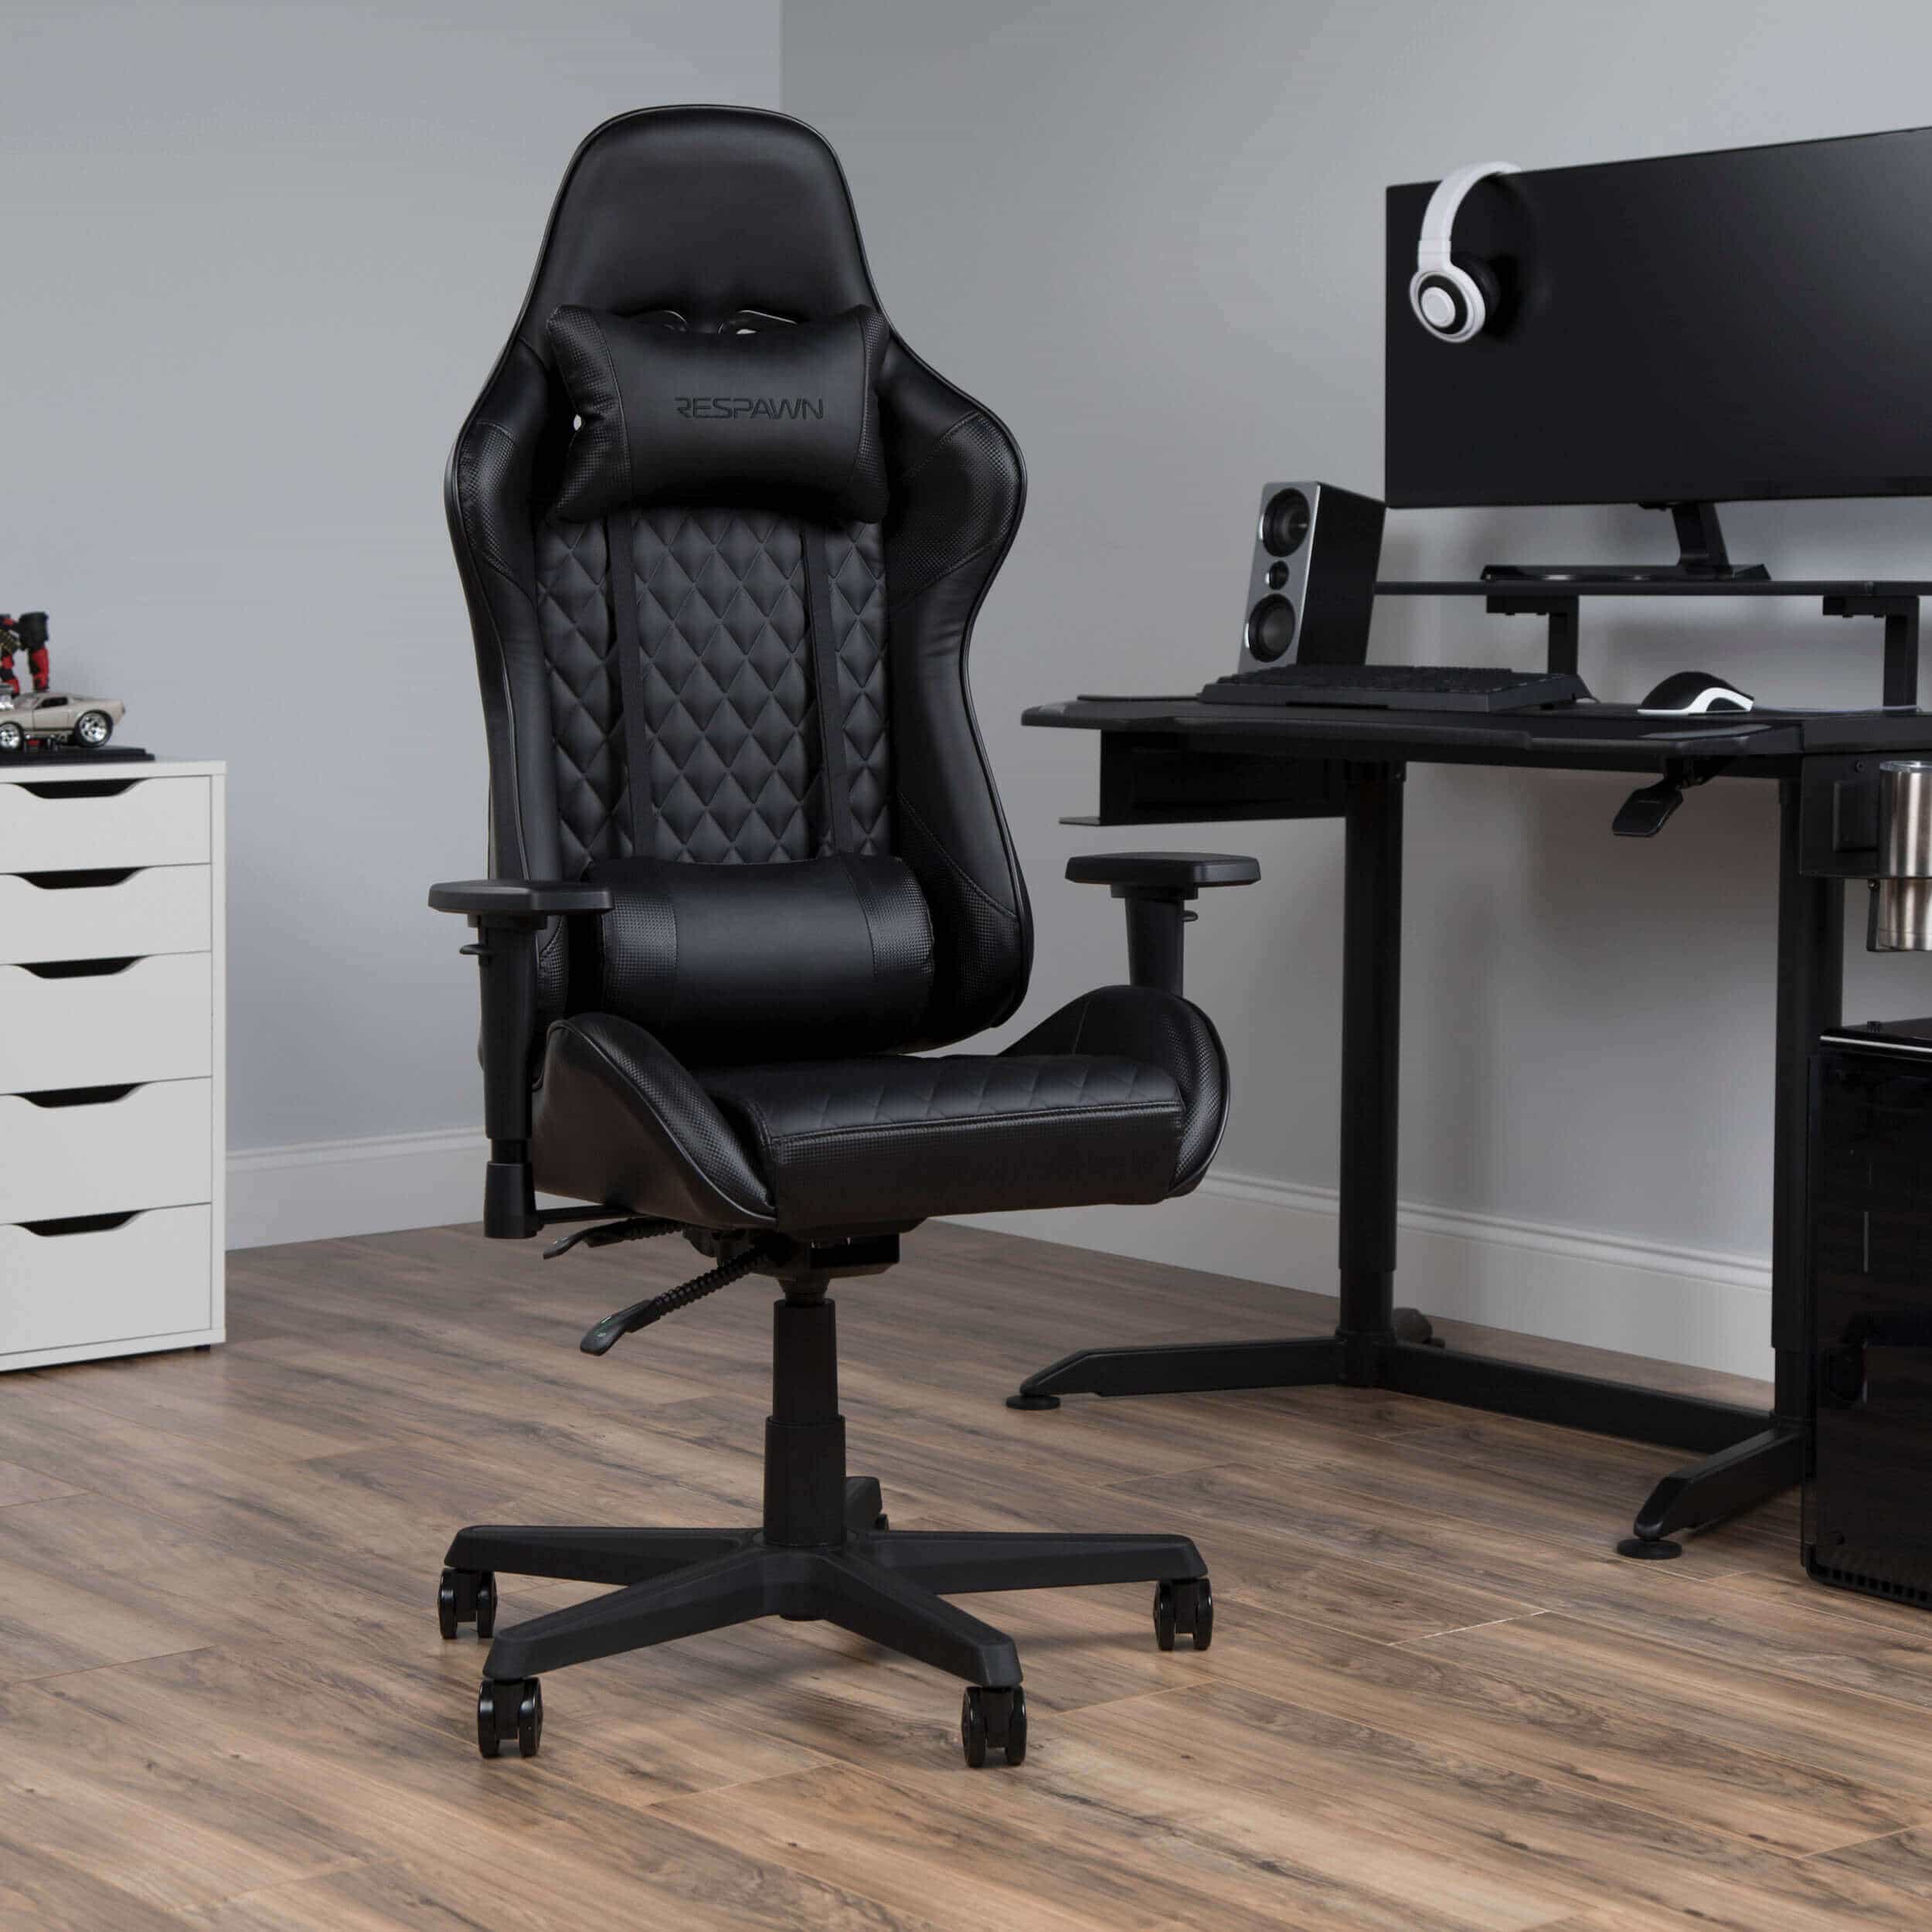 Cool Gaming Chair Designs / Order online to get your desired gaming